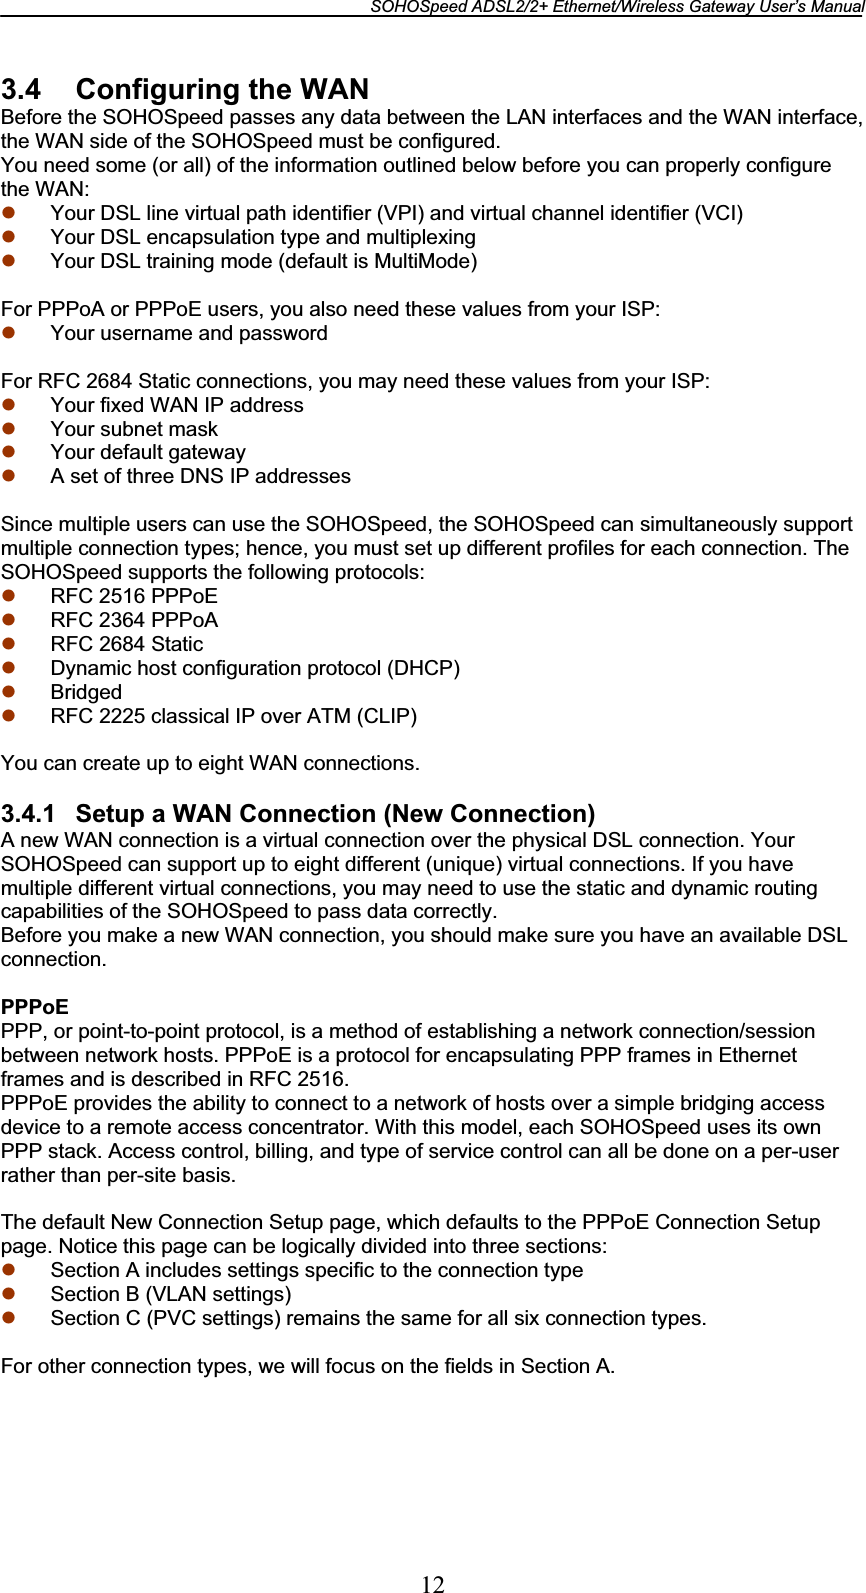 SOHOSpeed ADSL2/2+ Ethernet/Wireless Gateway User’s Manual 123.4 Configuring the WAN Before the SOHOSpeed passes any data between the LAN interfaces and the WAN interface, the WAN side of the SOHOSpeed must be configured. You need some (or all) of the information outlined below before you can properly configure the WAN: z Your DSL line virtual path identifier (VPI) and virtual channel identifier (VCI) z Your DSL encapsulation type and multiplexing z Your DSL training mode (default is MultiMode) For PPPoA or PPPoE users, you also need these values from your ISP: z Your username and password For RFC 2684 Static connections, you may need these values from your ISP: z Your fixed WAN IP address z Your subnet mask z Your default gateway z A set of three DNS IP addresses Since multiple users can use the SOHOSpeed, the SOHOSpeed can simultaneously support multiple connection types; hence, you must set up different profiles for each connection. The SOHOSpeed supports the following protocols: z RFC 2516 PPPoE z RFC 2364 PPPoA z RFC 2684 Static z Dynamic host configuration protocol (DHCP) z Bridged z RFC 2225 classical IP over ATM (CLIP) You can create up to eight WAN connections. 3.4.1  Setup a WAN Connection (New Connection) A new WAN connection is a virtual connection over the physical DSL connection. Your SOHOSpeed can support up to eight different (unique) virtual connections. If you have multiple different virtual connections, you may need to use the static and dynamic routing capabilities of the SOHOSpeed to pass data correctly. Before you make a new WAN connection, you should make sure you have an available DSL connection. PPPoEPPP, or point-to-point protocol, is a method of establishing a network connection/session between network hosts. PPPoE is a protocol for encapsulating PPP frames in Ethernet frames and is described in RFC 2516. PPPoE provides the ability to connect to a network of hosts over a simple bridging access device to a remote access concentrator. With this model, each SOHOSpeed uses its own PPP stack. Access control, billing, and type of service control can all be done on a per-user rather than per-site basis. The default New Connection Setup page, which defaults to the PPPoE Connection Setup page. Notice this page can be logically divided into three sections: z Section A includes settings specific to the connection type z Section B (VLAN settings) z Section C (PVC settings) remains the same for all six connection types. For other connection types, we will focus on the fields in Section A. 